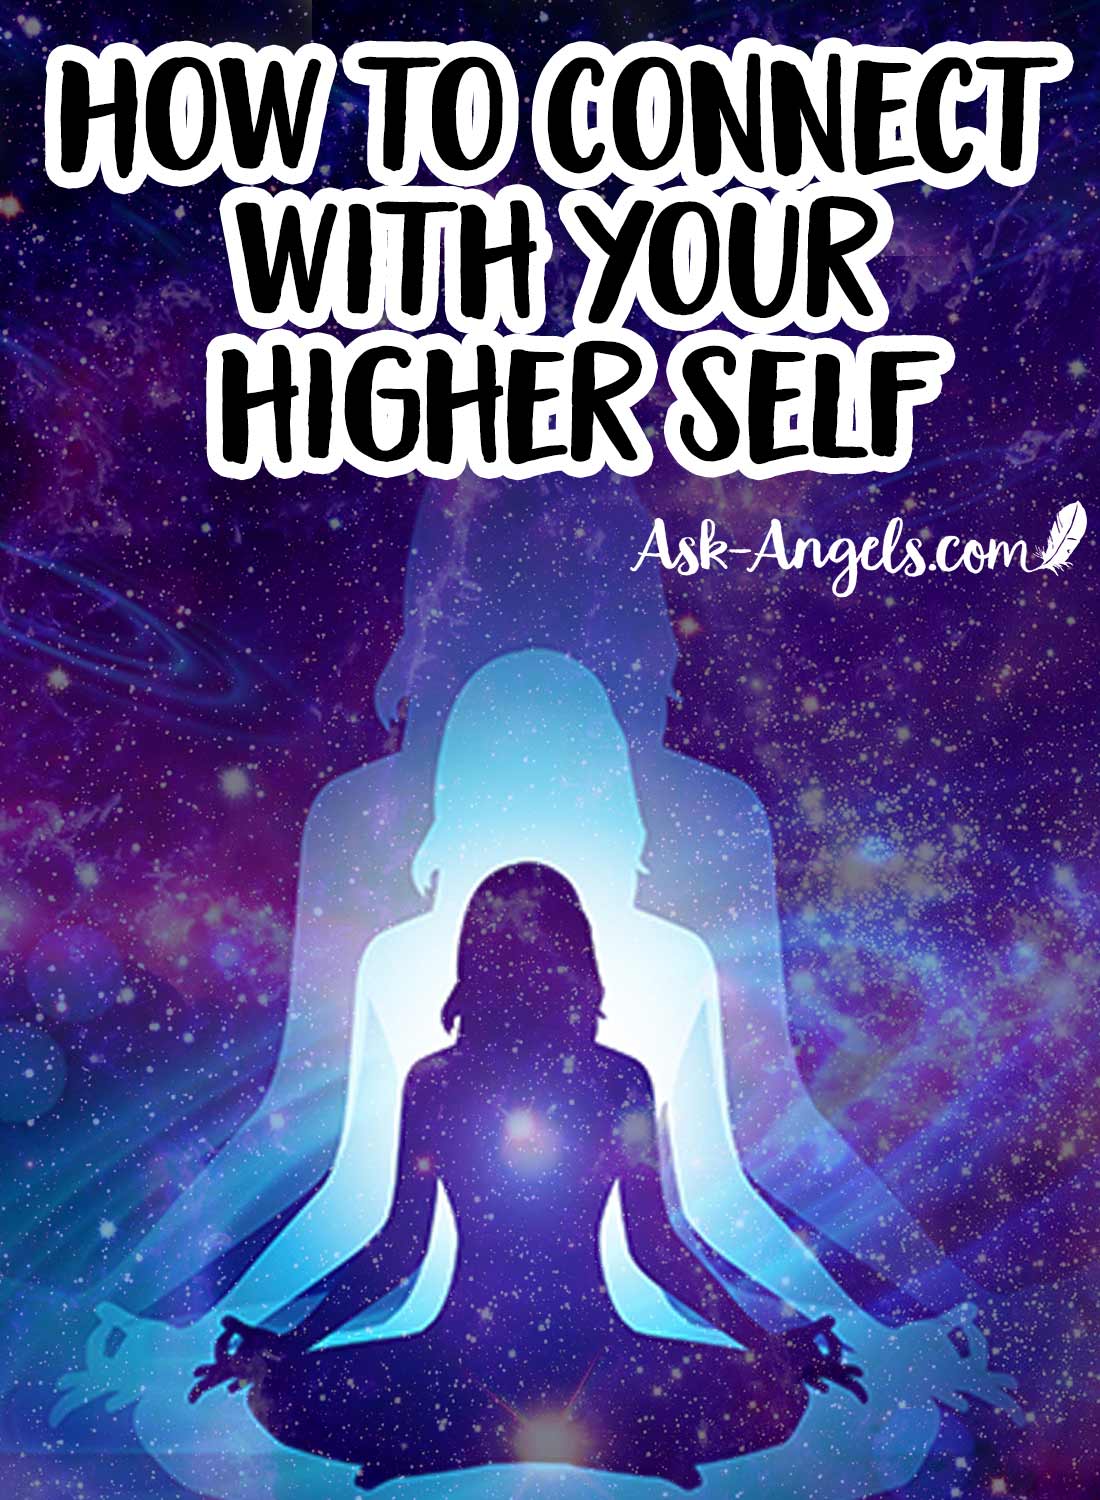 How to Connect with Your Higher Self